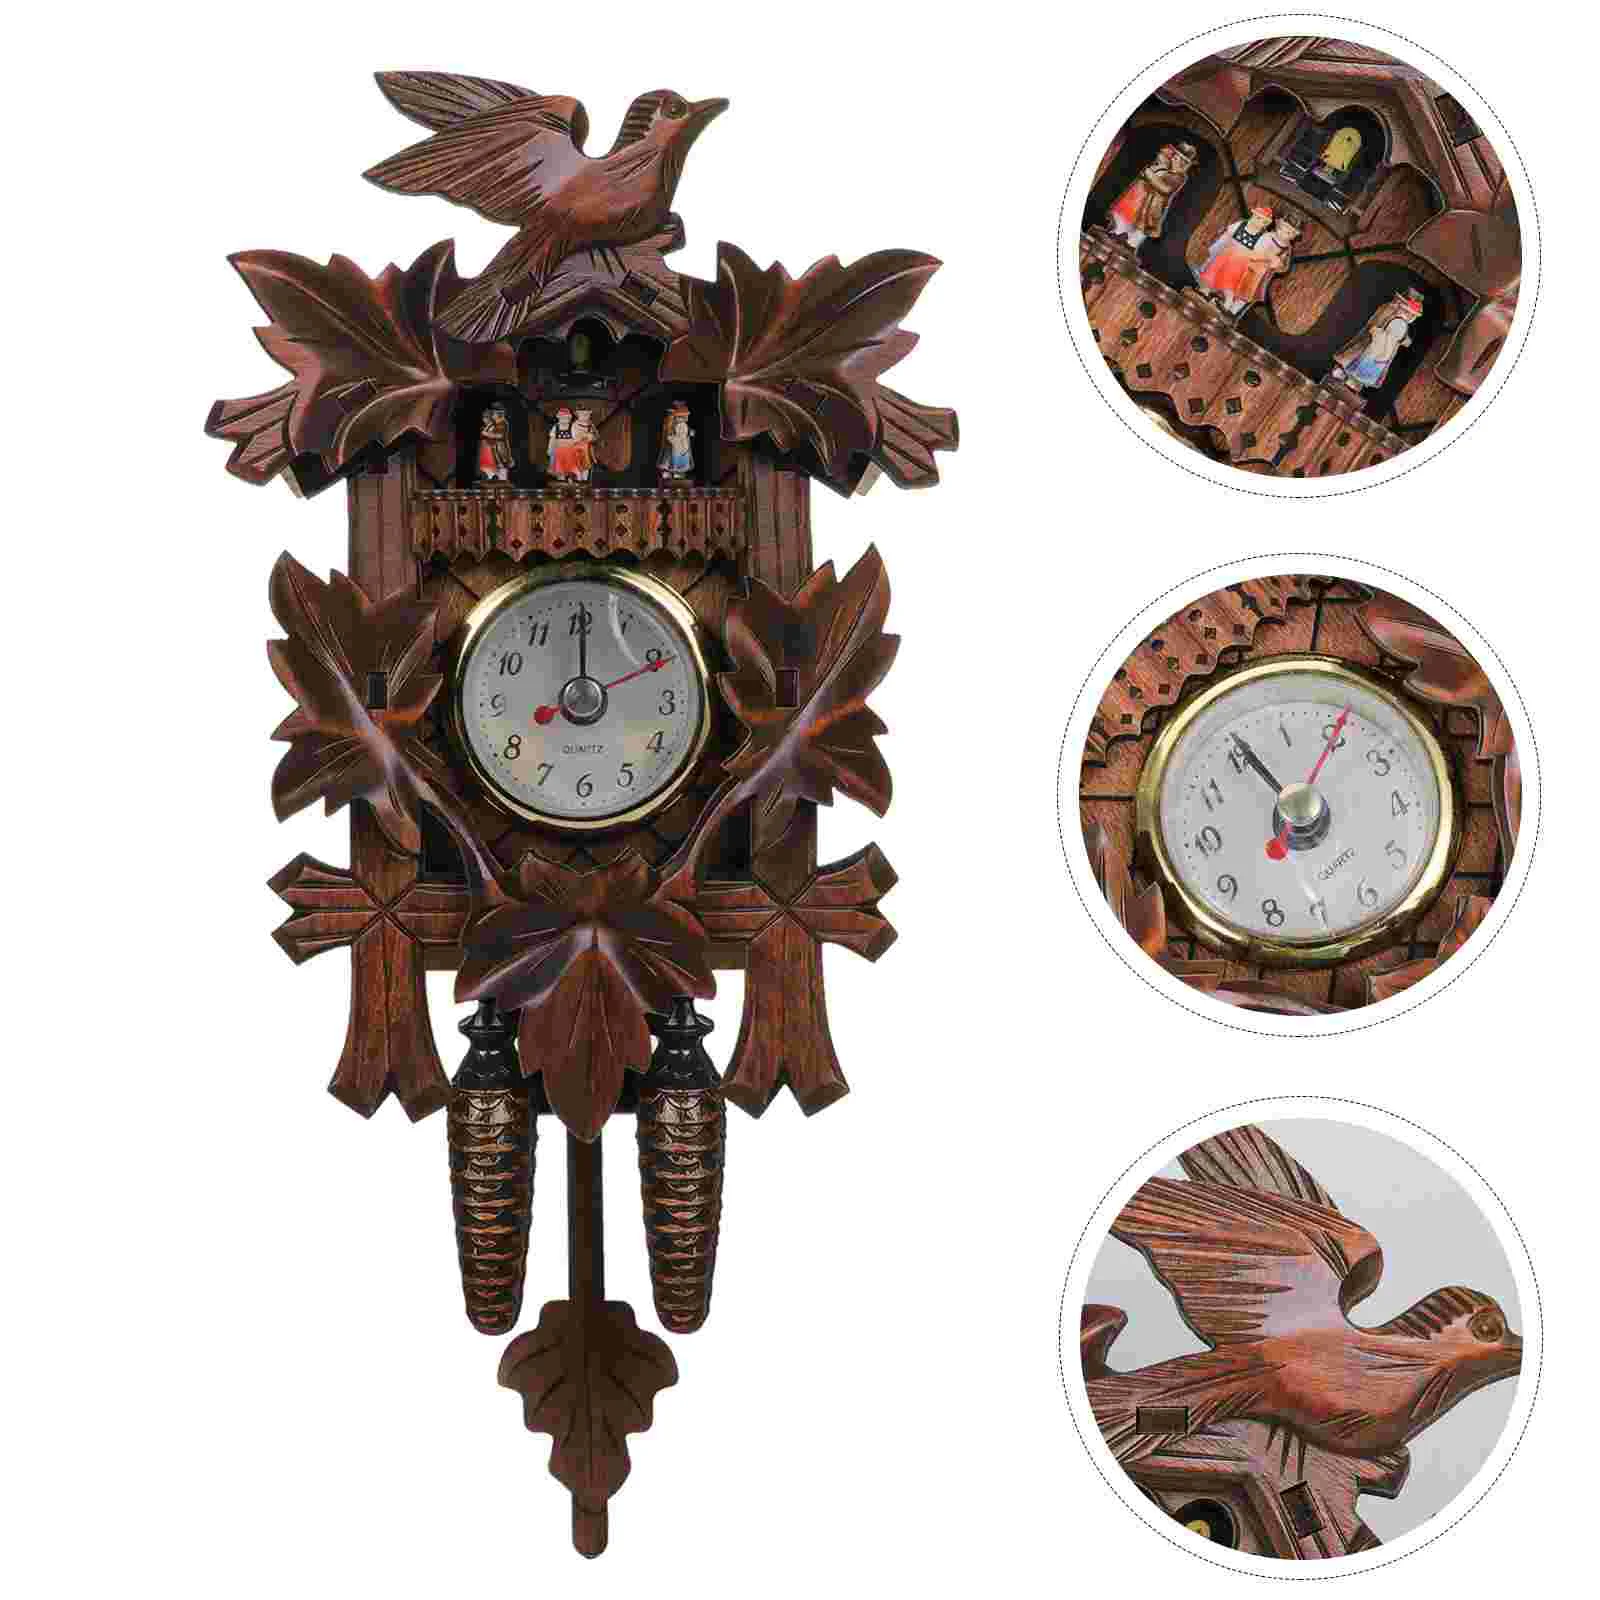 

Besportble Wood Wall Clock Rustic Wooden Birds Cuckoo Christmas Decoration Gifts